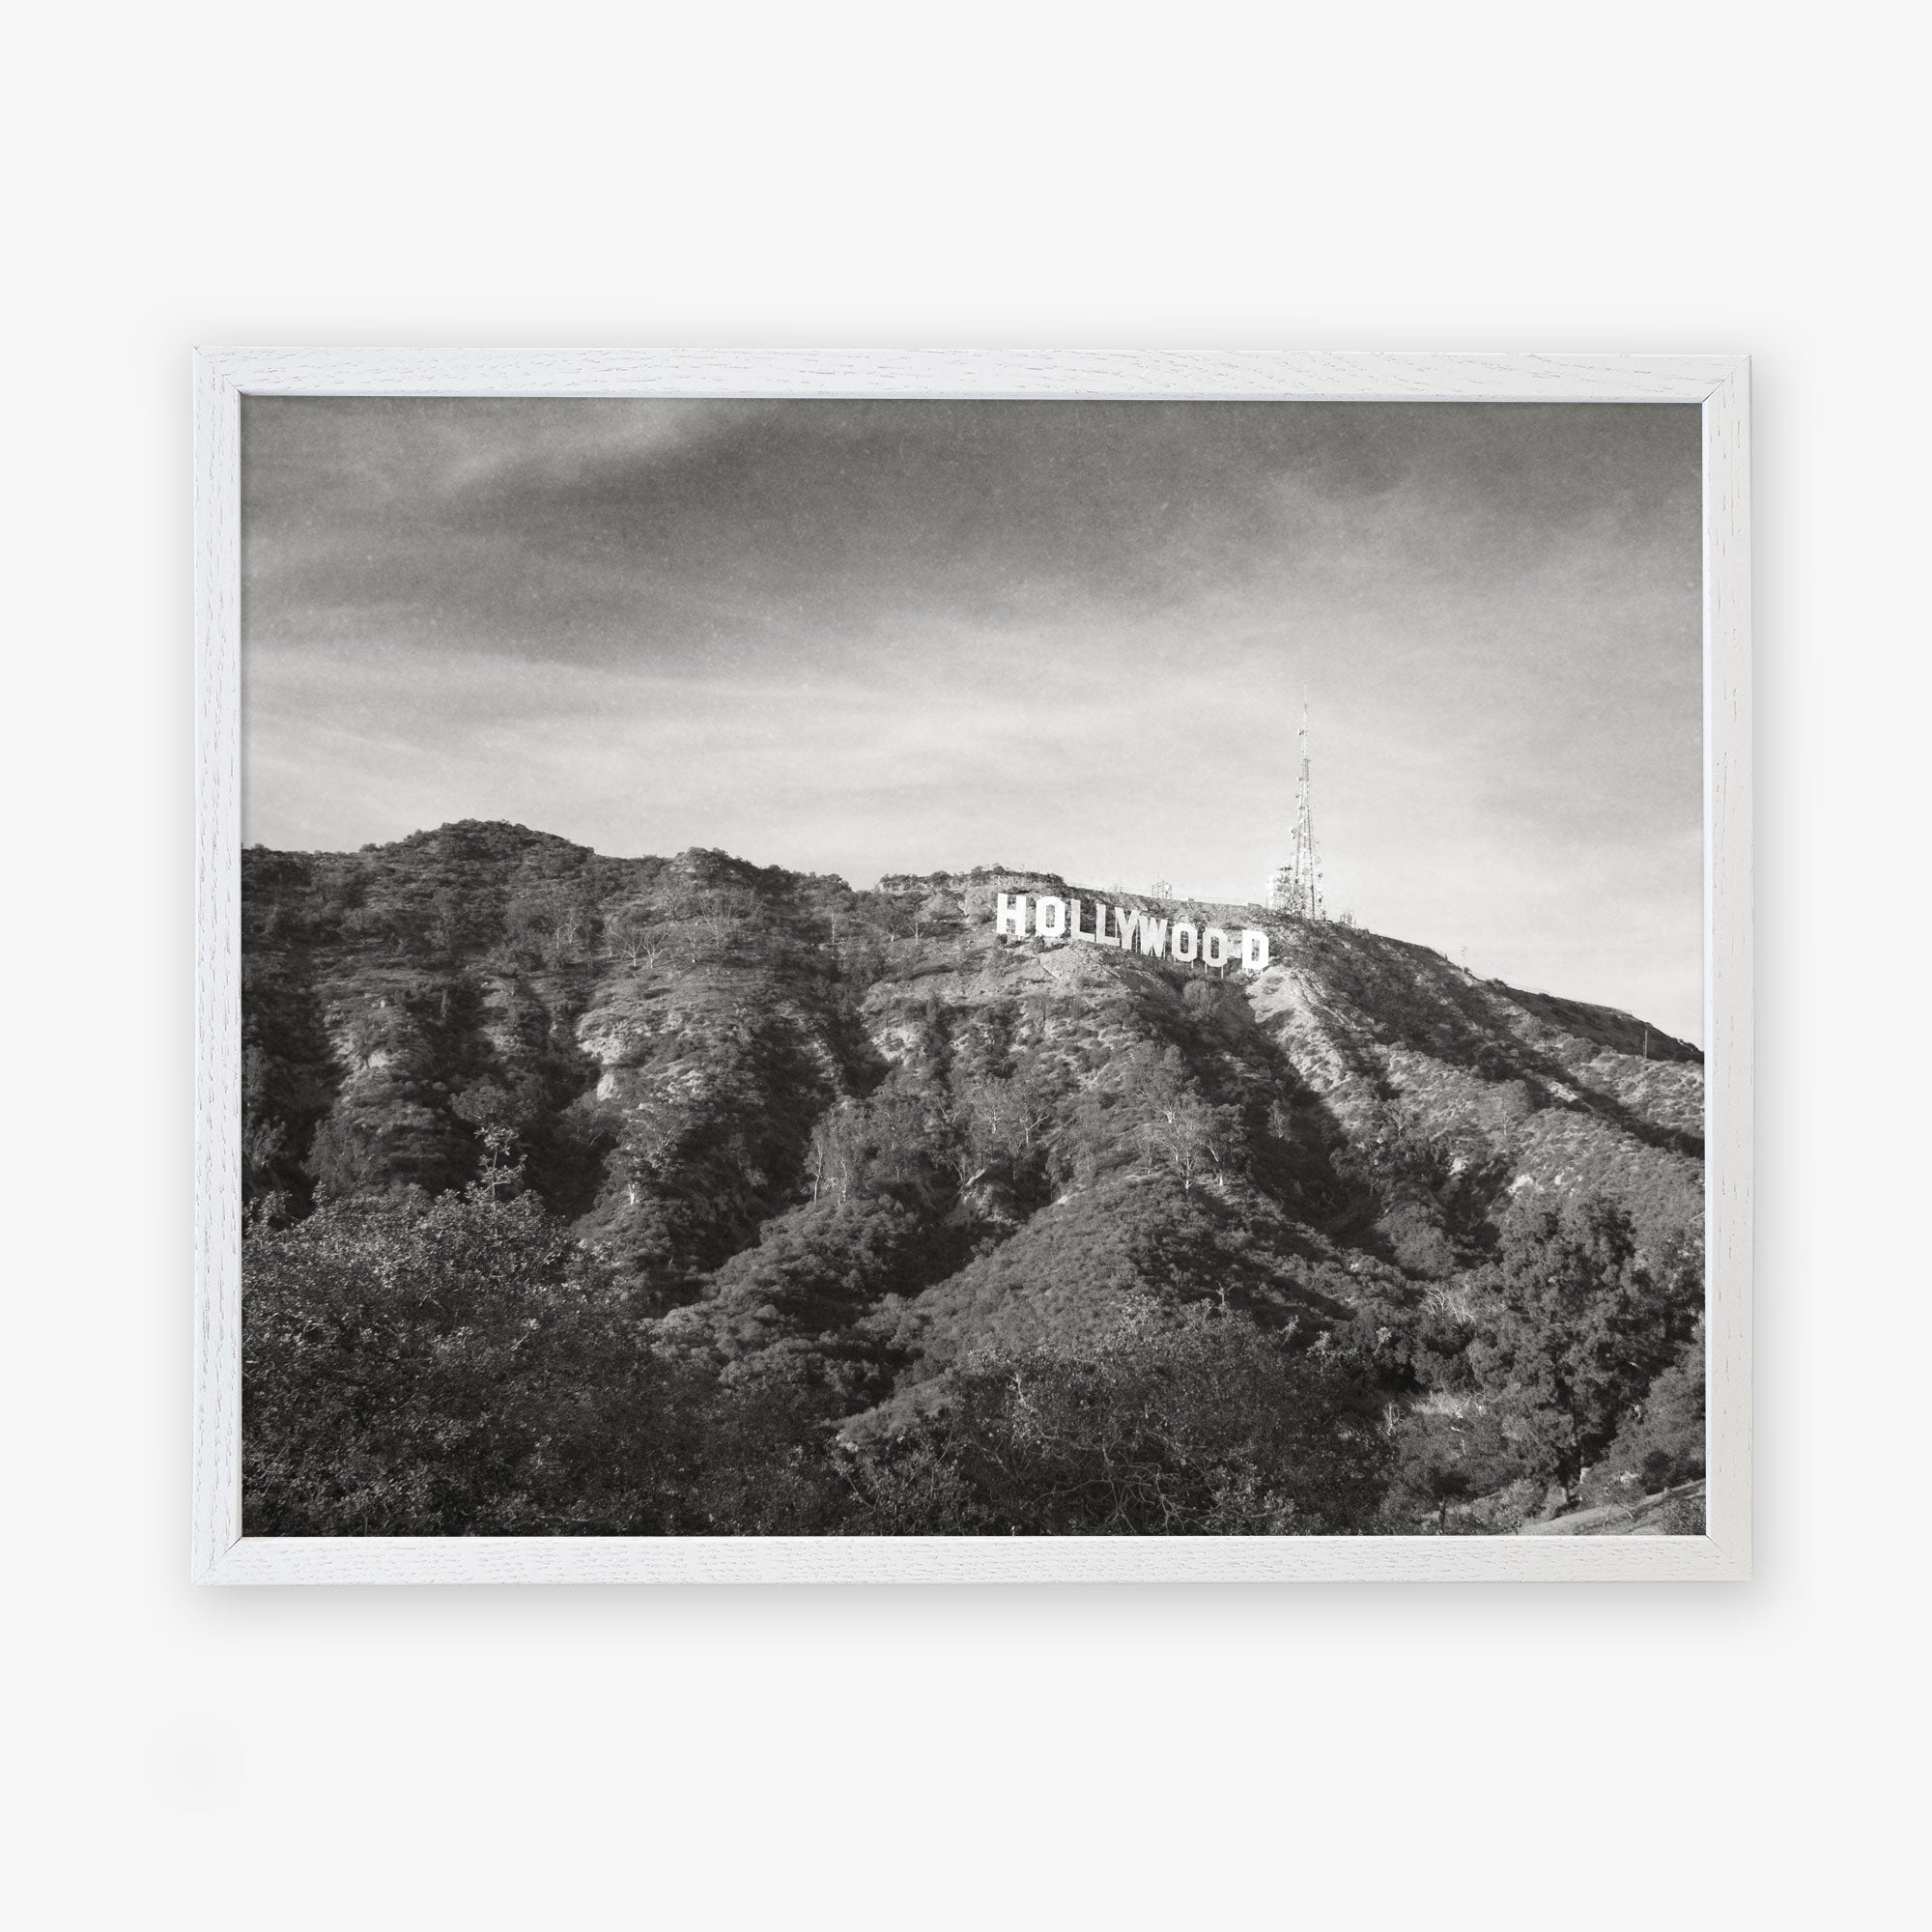 Black and white photo of the Hollywood Sign Black and White Vintage Print, &#39;Old Hollywood&#39; on a hillside, printed on archival photographic paper, framed by a clear sky and sparse vegetation, by Offley Green.